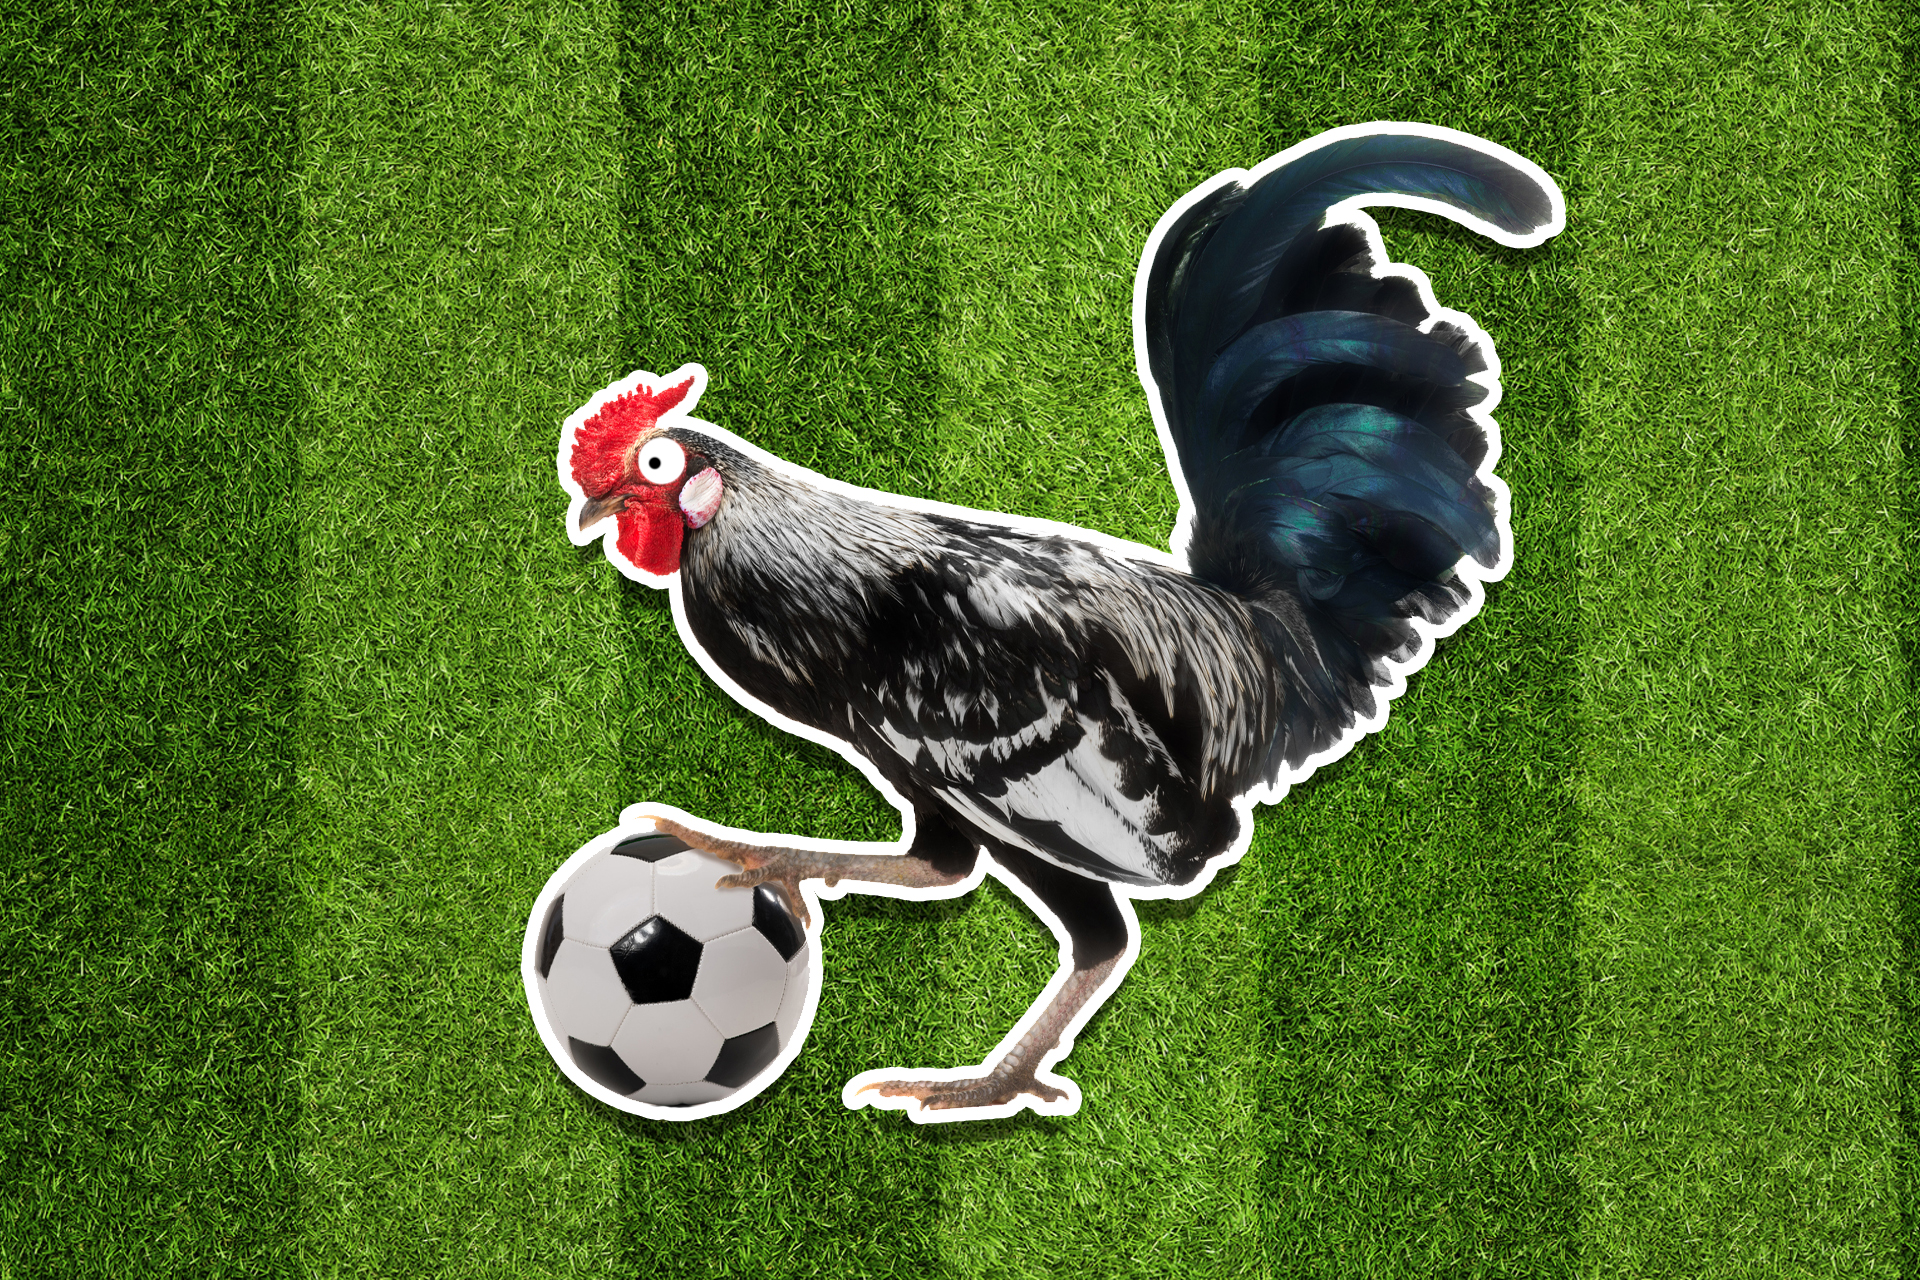 A rooster with a ball